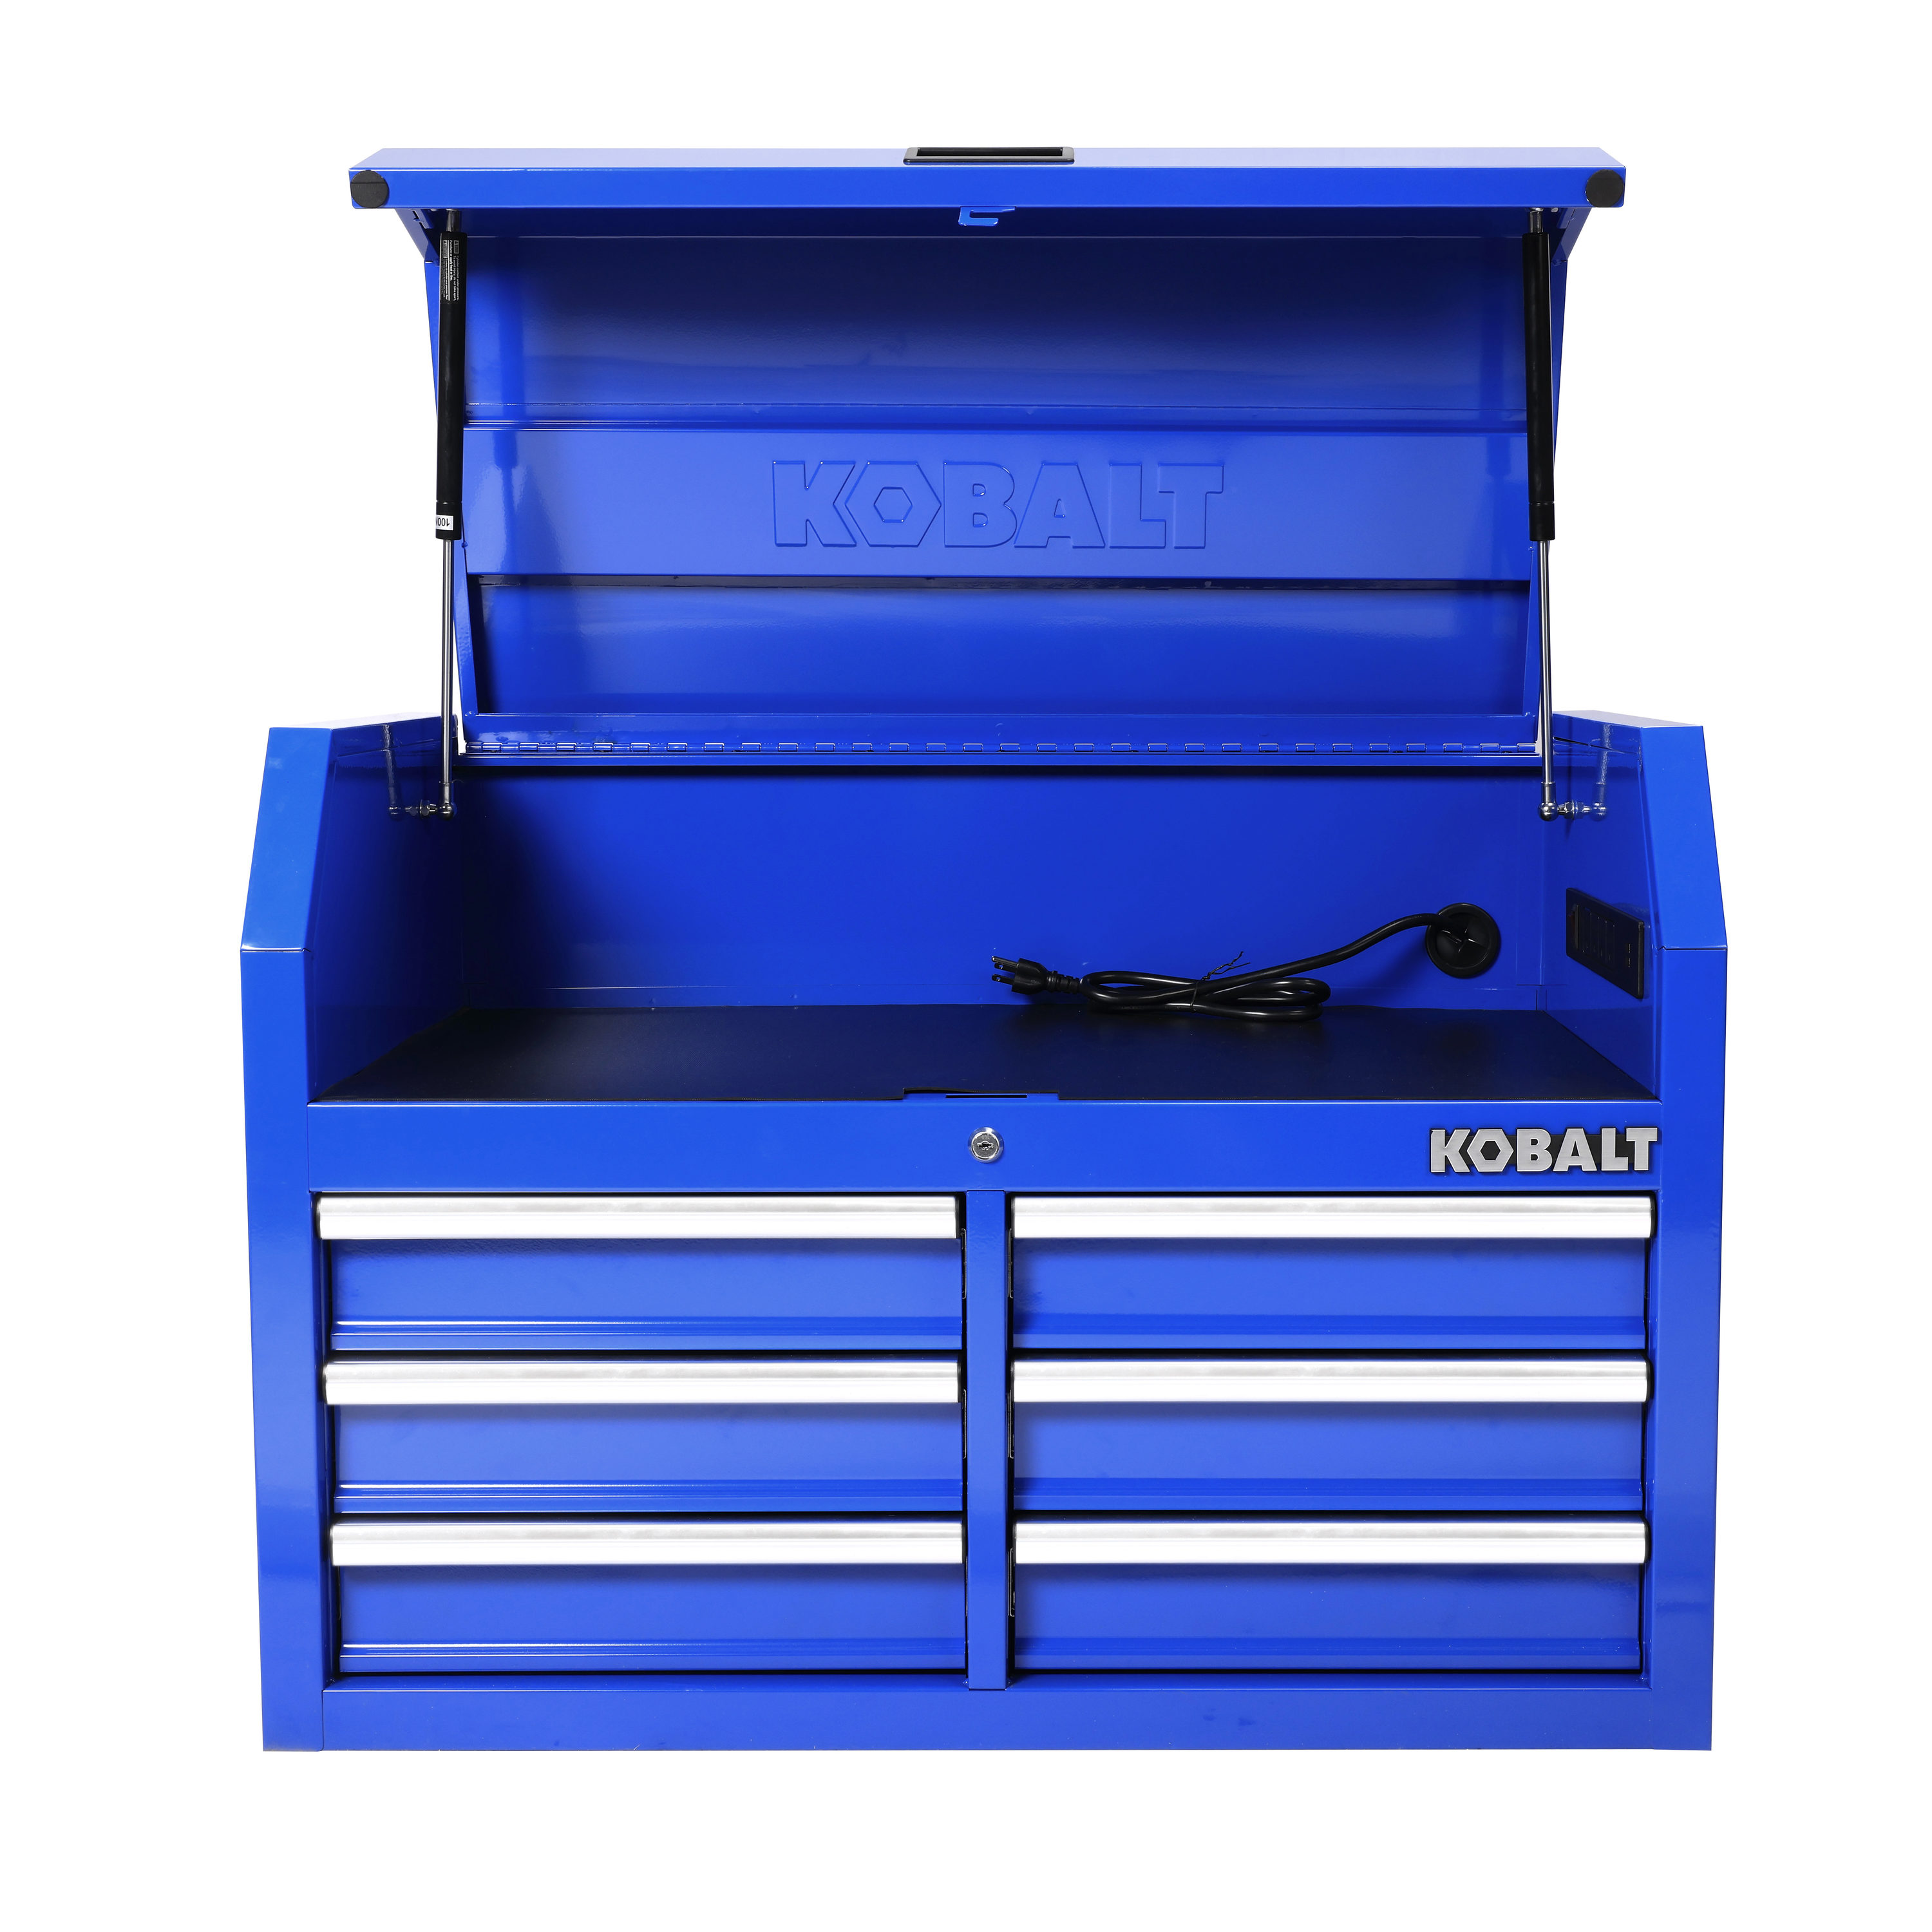 Kobalt 356 In W X 248 In H 6 Drawer Steel Tool Chest Blue At